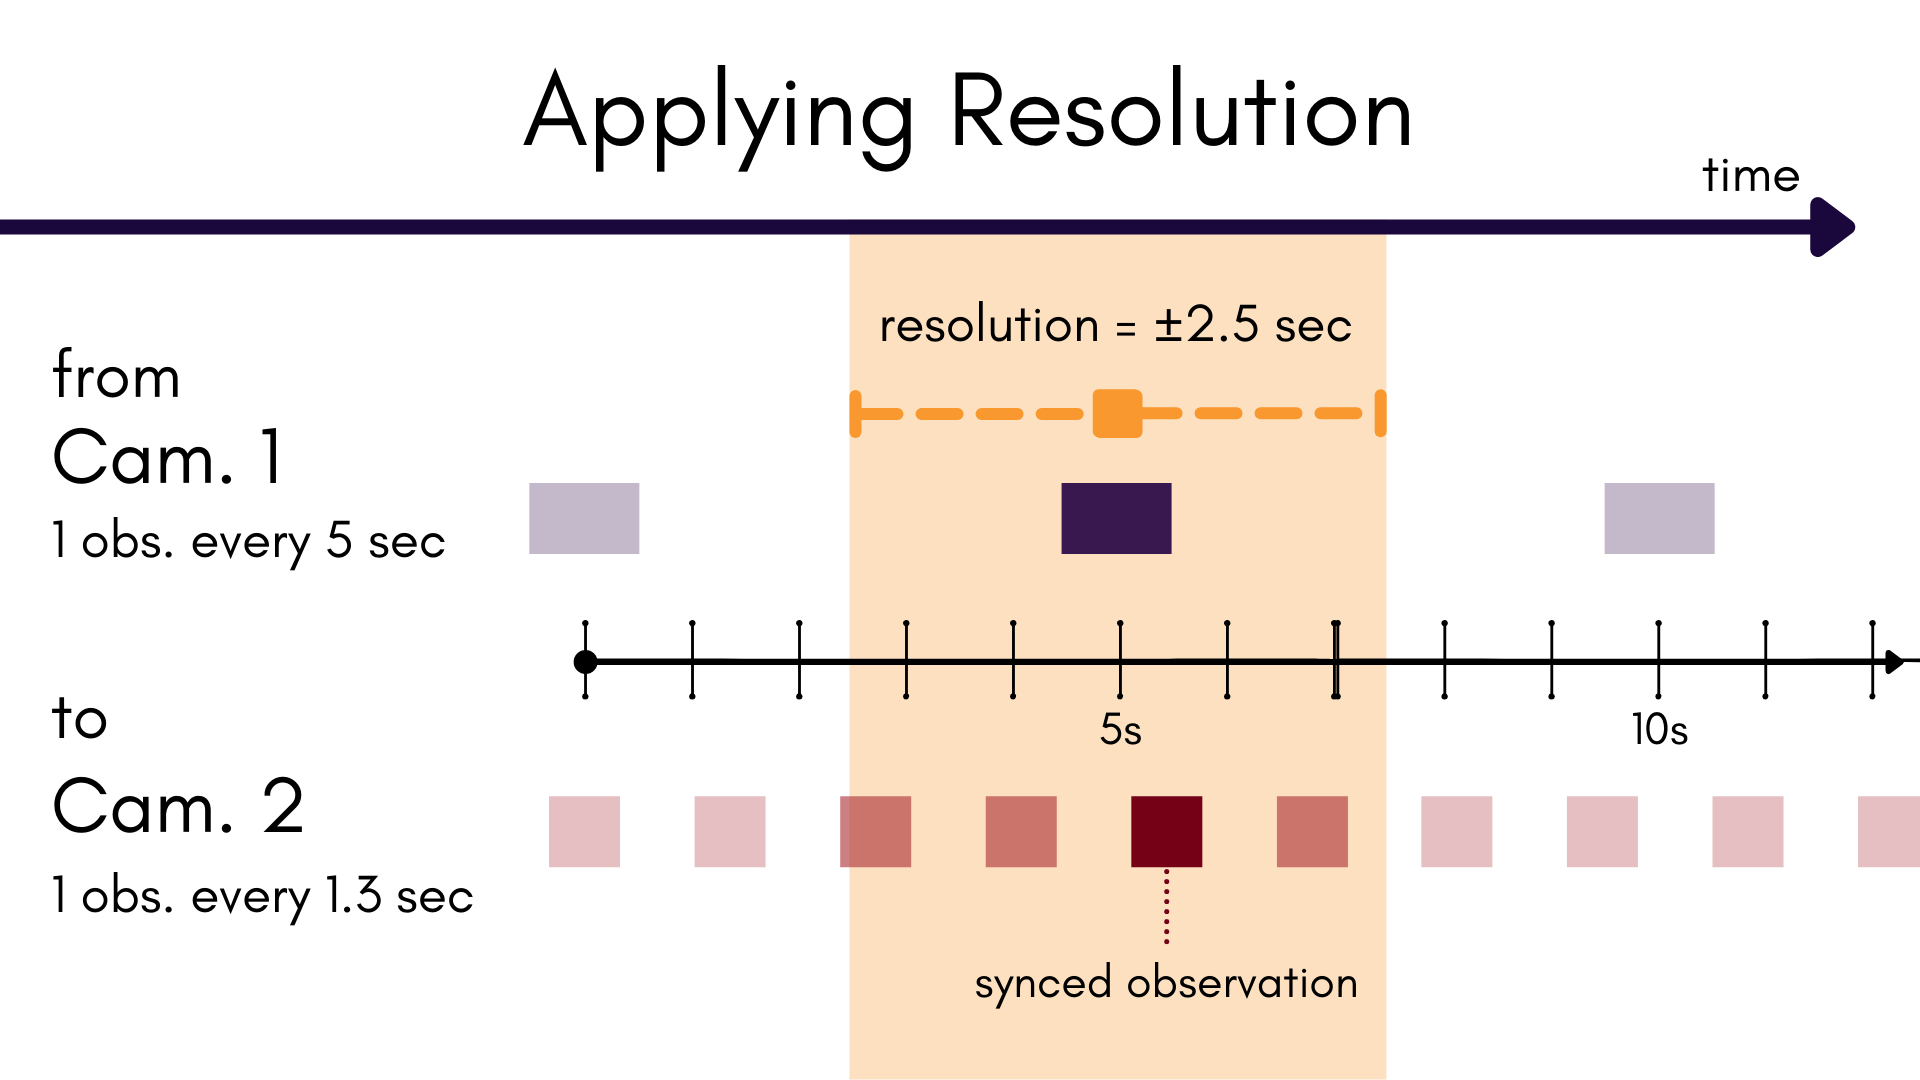 Applying resolution to an observation series